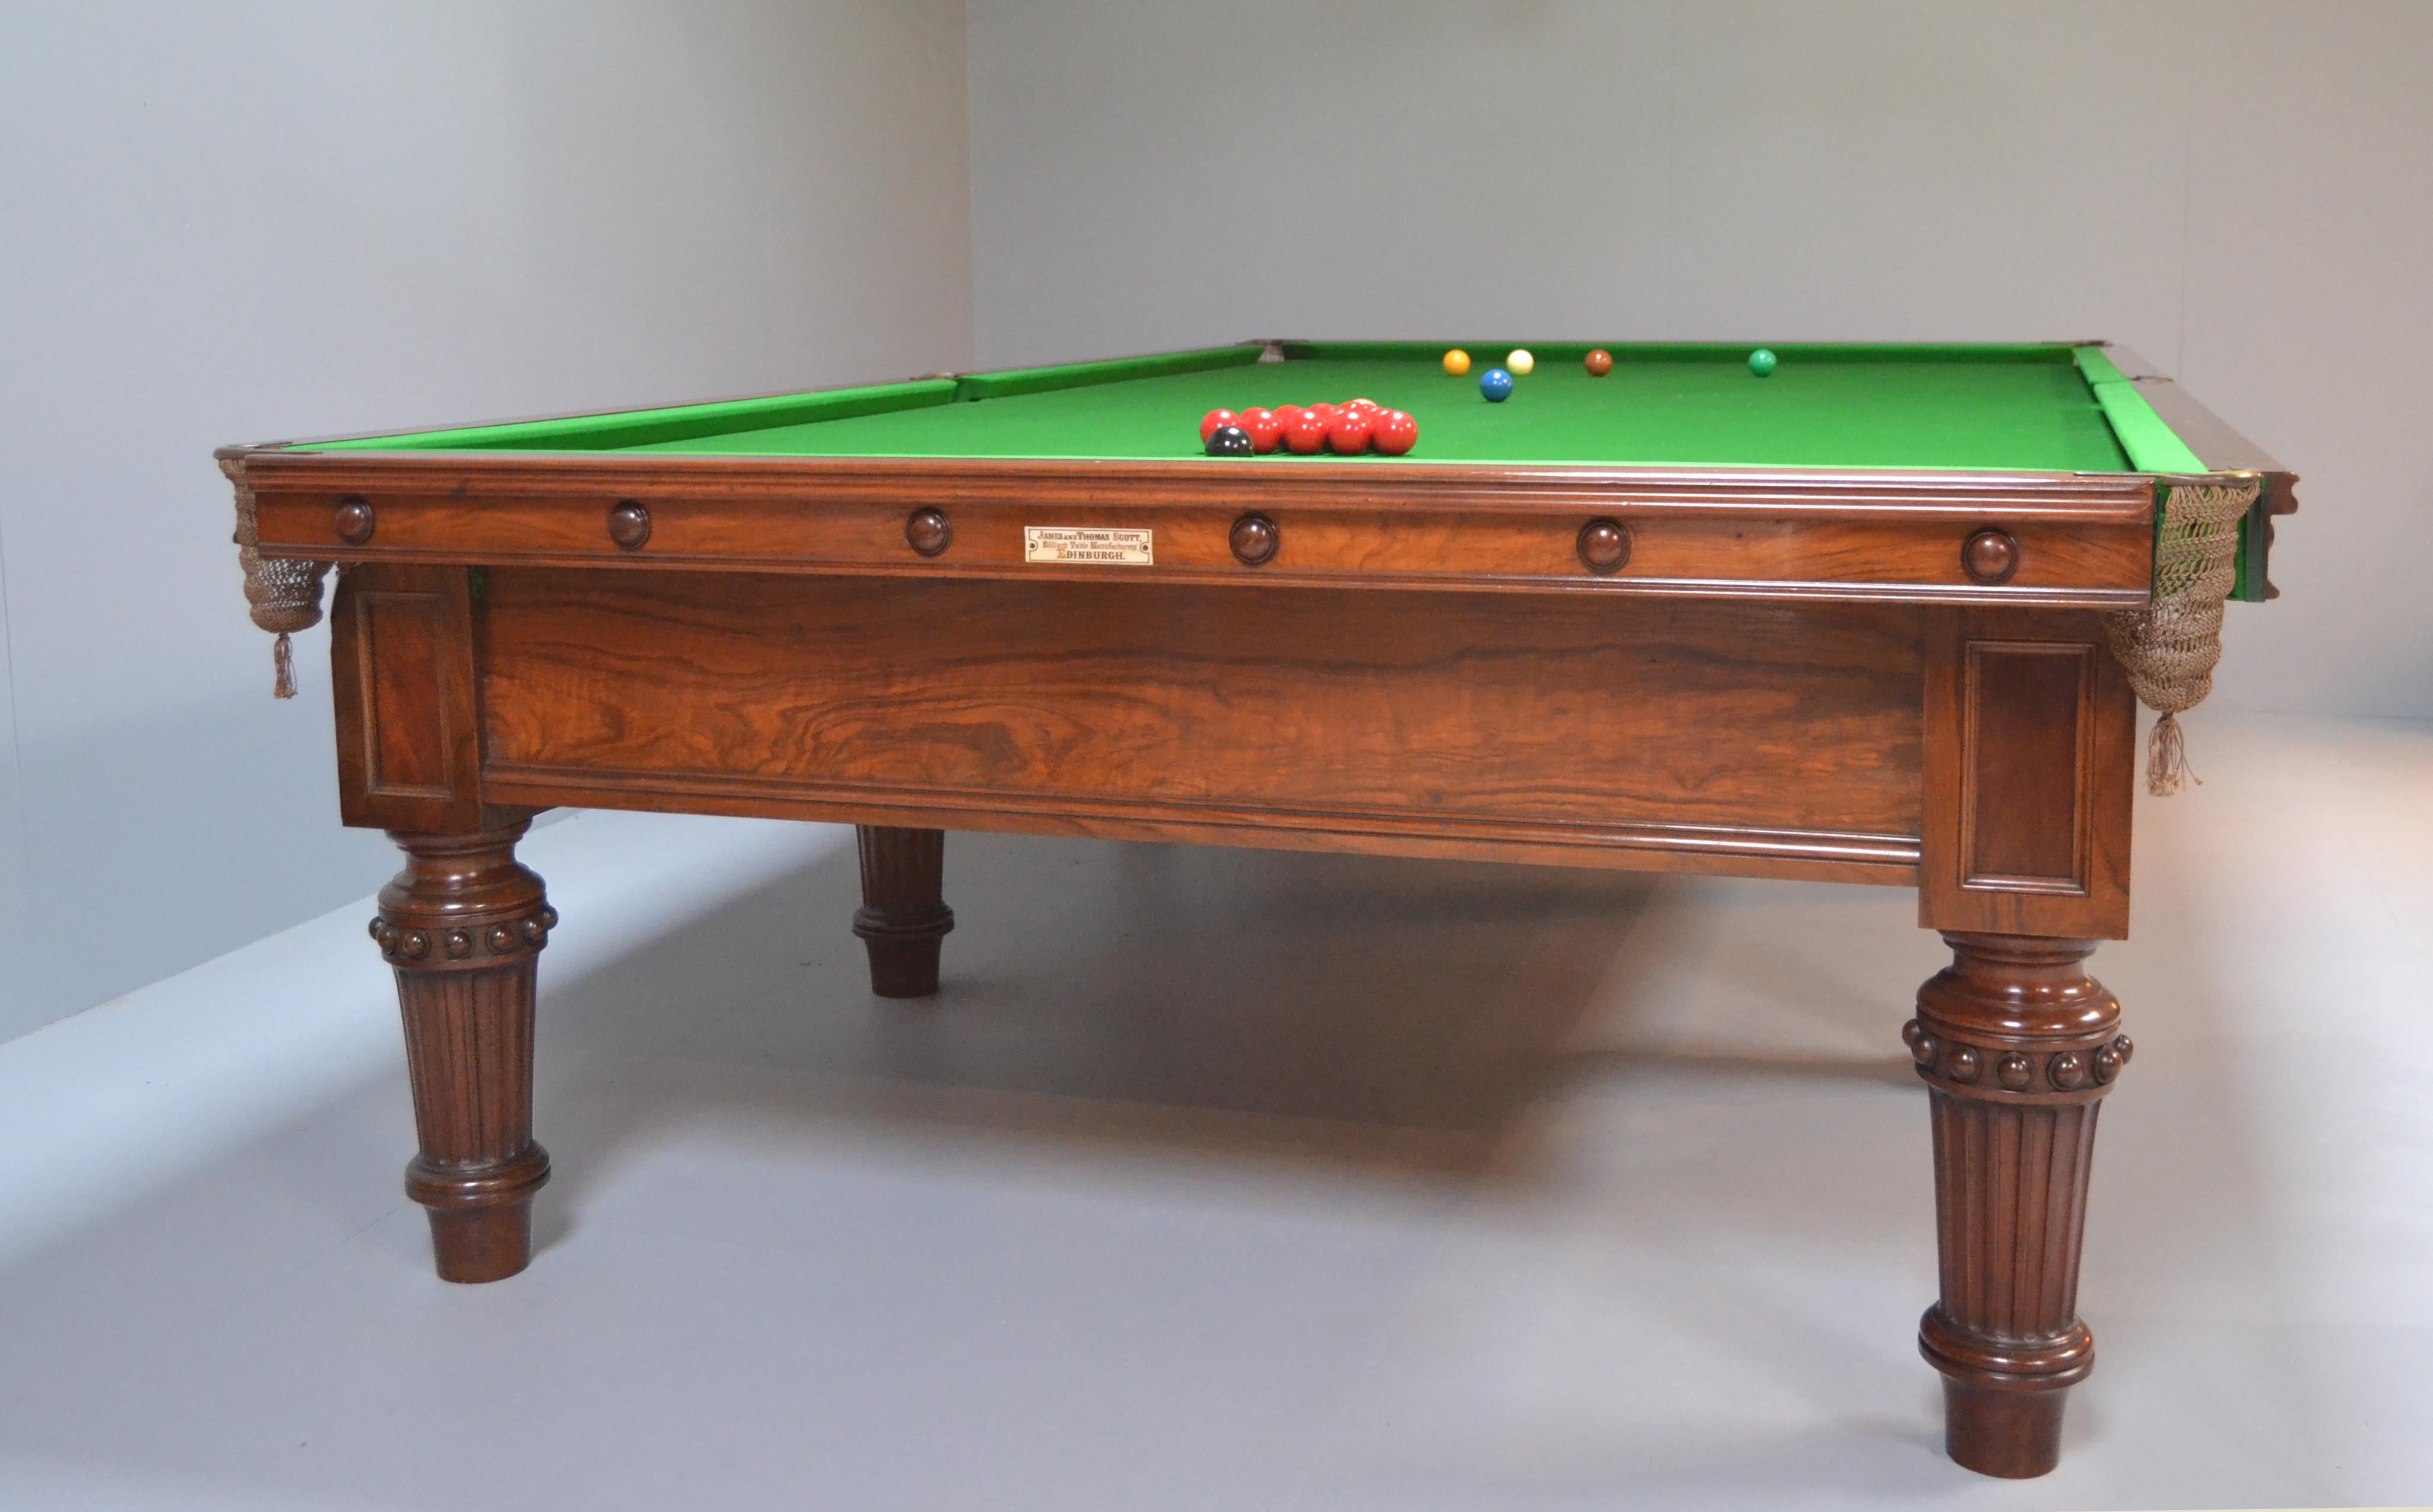 This beautiful full size Country House Billiard - Snooker table was made circa 1870 by J & T Scott of Edinburgh, it is a superb cut of figured walnut and exudes both quality and presence. 

Standing on eight elegant shaped and fluted legs with